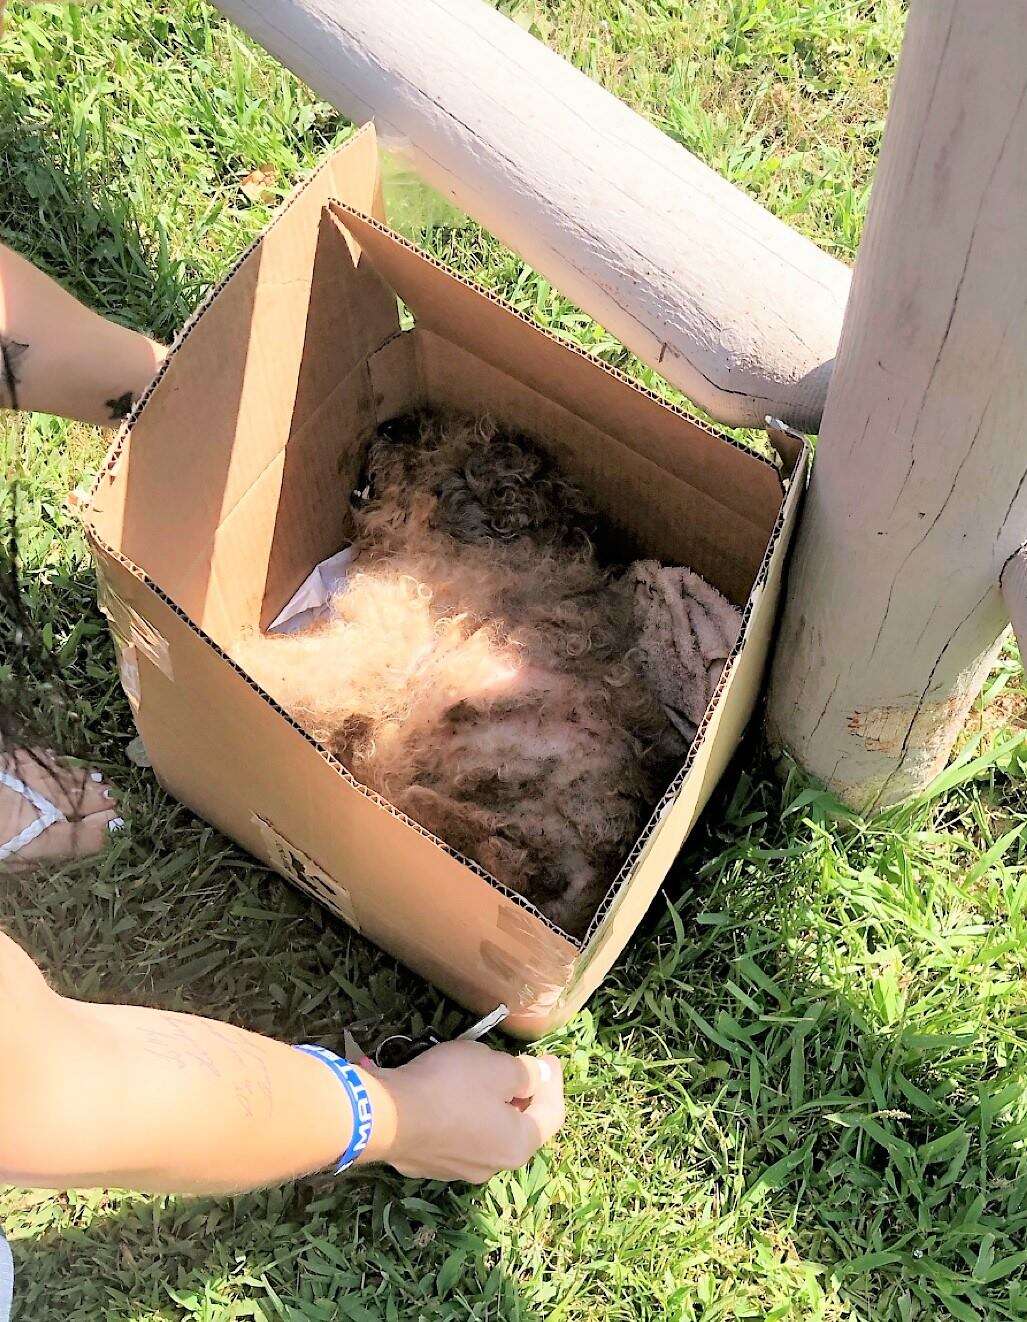 Volunteer finds poodle in box outside New Jersey shelter